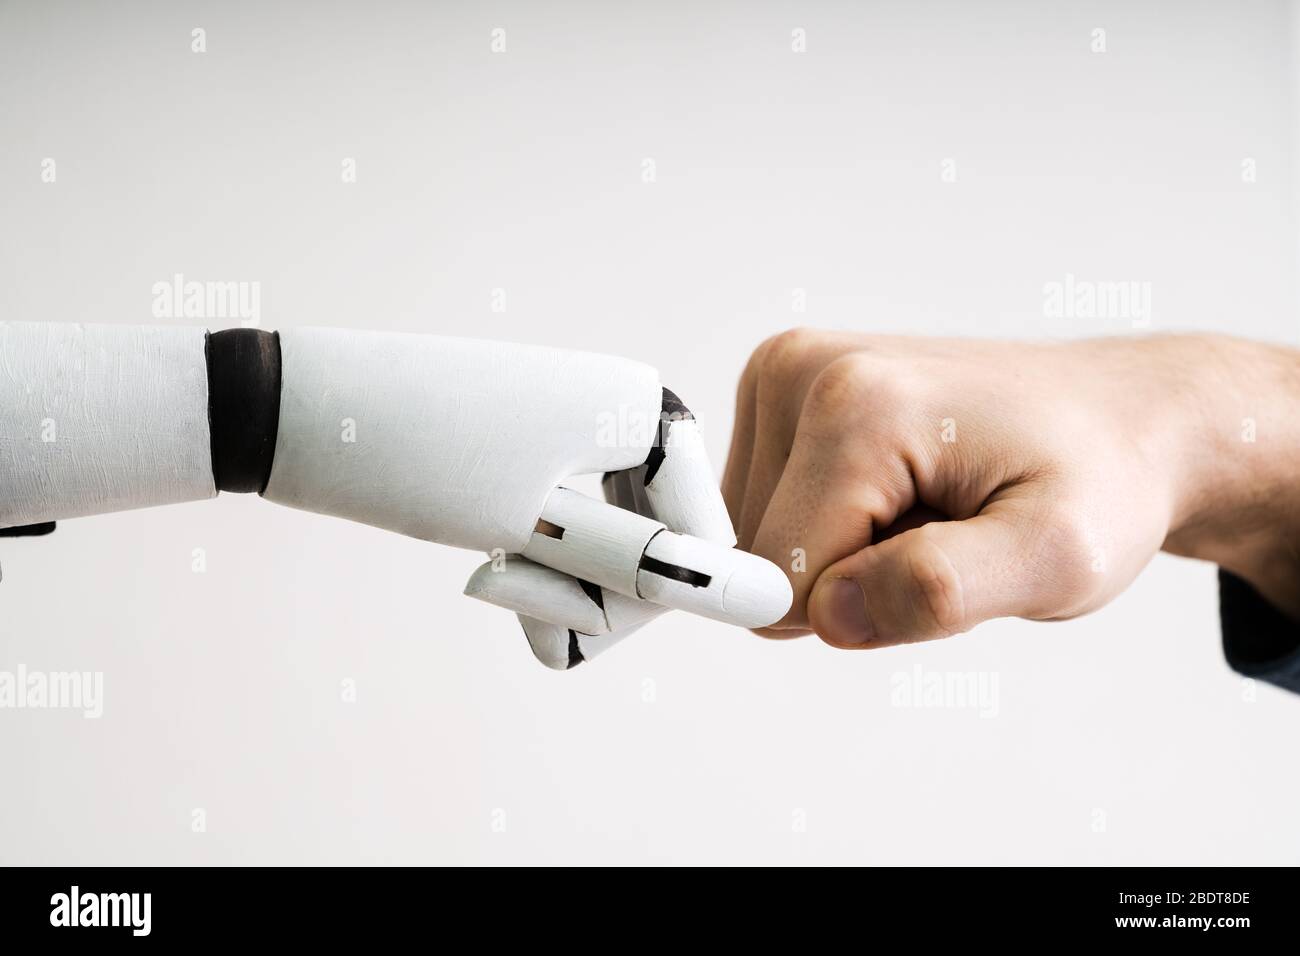 Robot And Human Hand Making Fist Bump On Grey Background Stock Photo